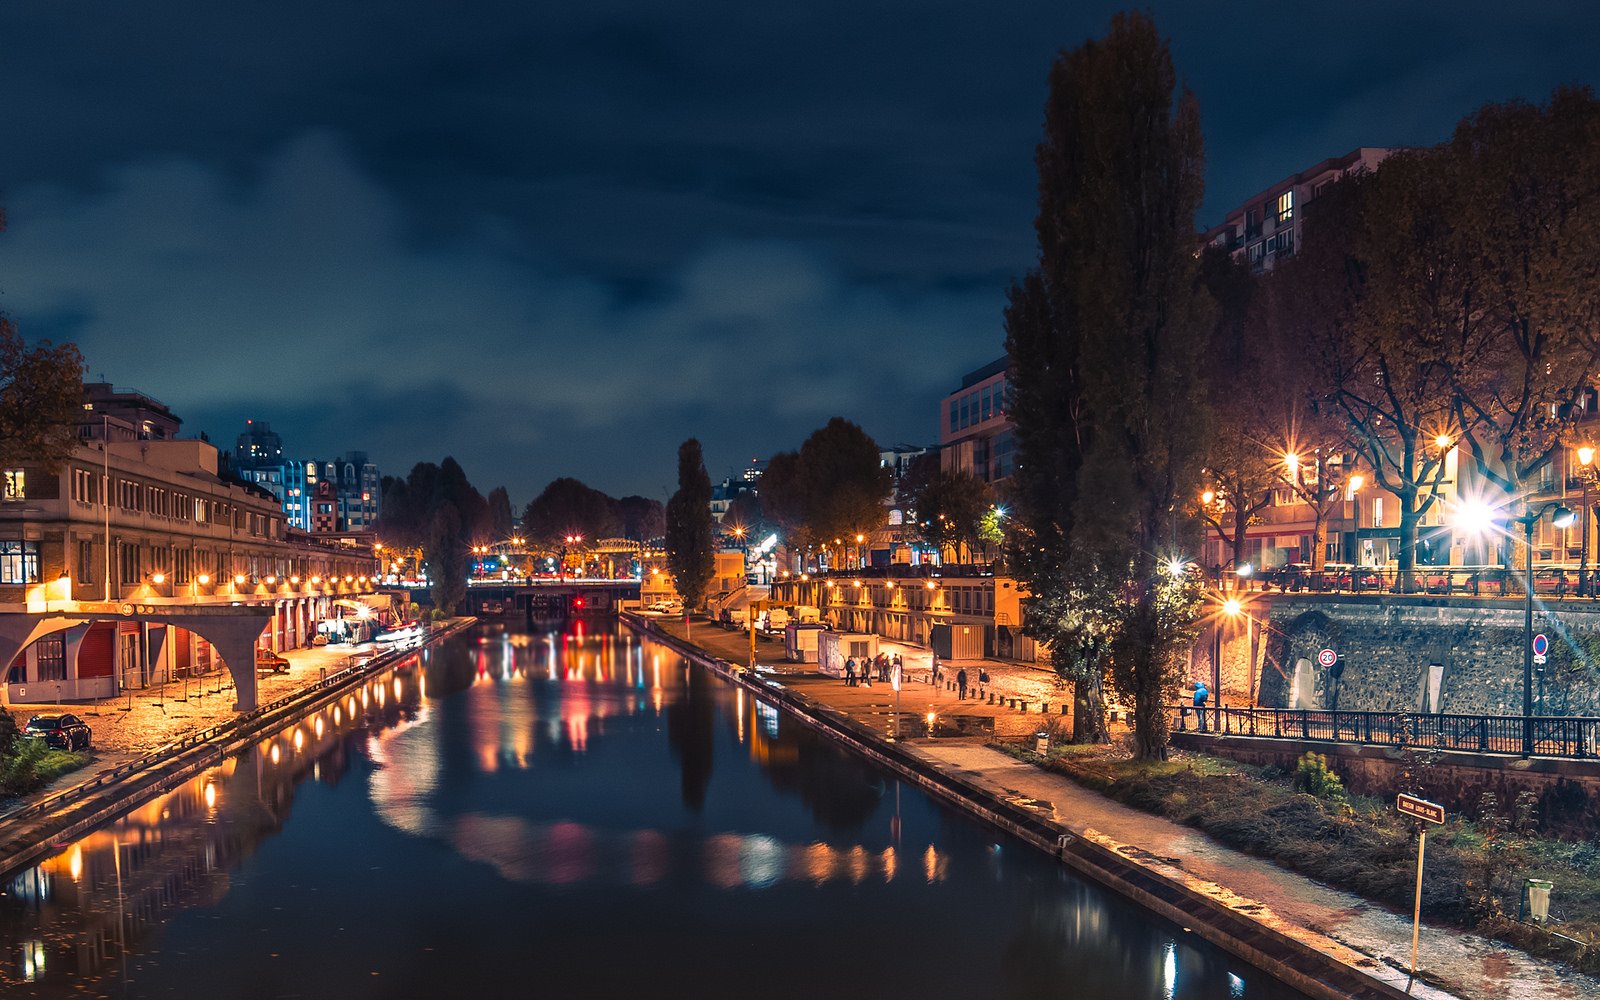 How to take a walk along the canal Saint-Martin in Paris